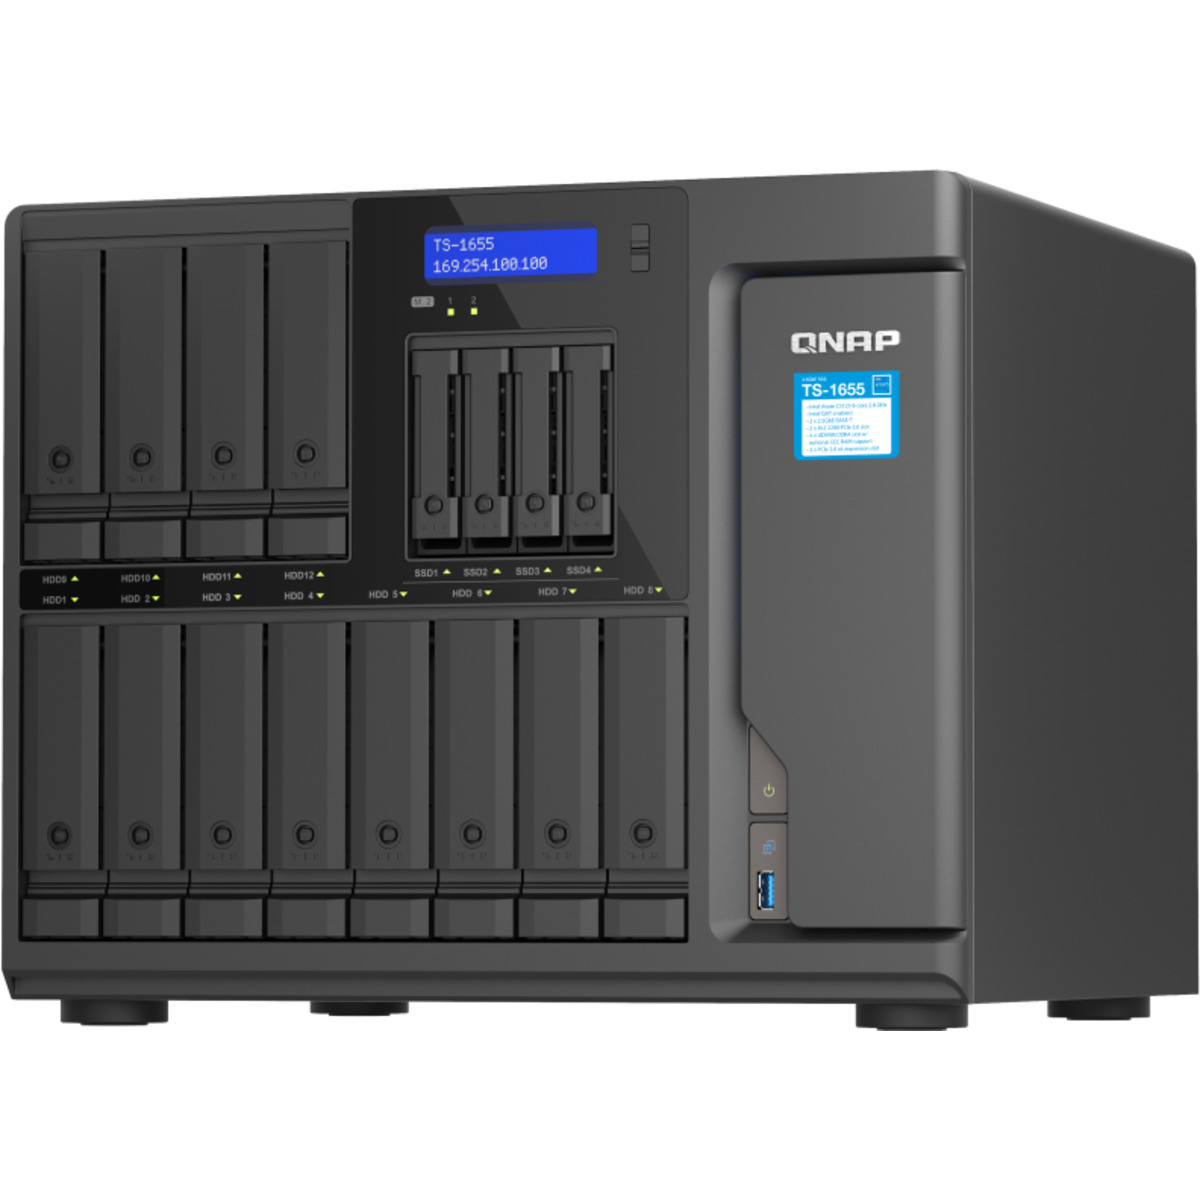 QNAP TS-1655 14tb 12+4-Bay Desktop Multimedia / Power User / Business NAS - Network Attached Storage Device 7x2tb Western Digital Red Plus WD20EFZX 3.5 5400rpm SATA 6Gb/s HDD NAS Class Drives Installed - Burn-In Tested - FREE RAM UPGRADE TS-1655